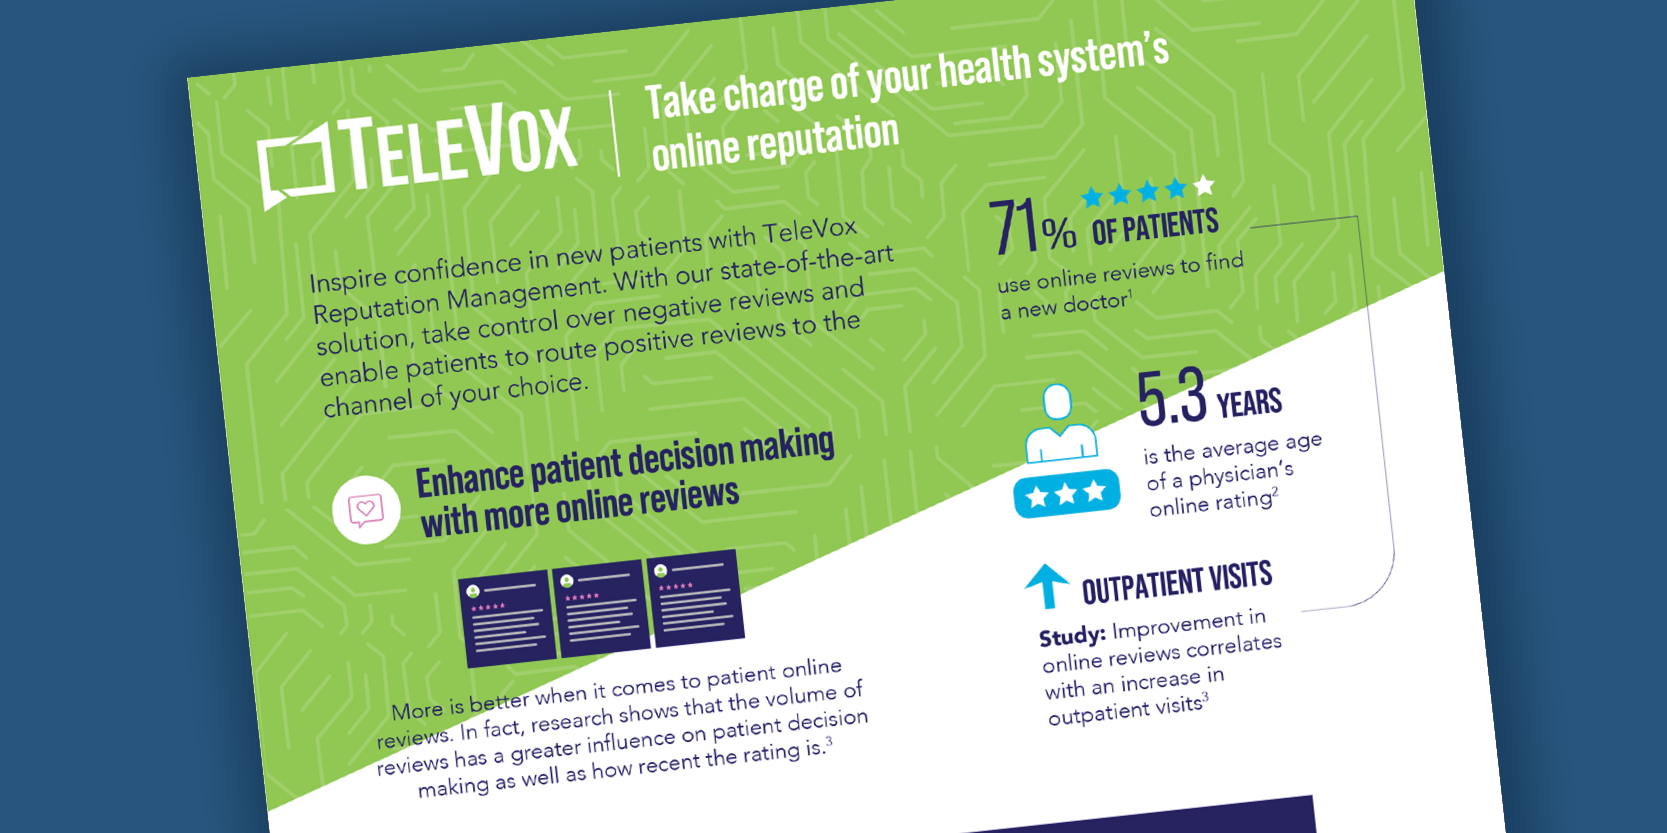 Take Control of Your Health System’s Online Reputation Today!